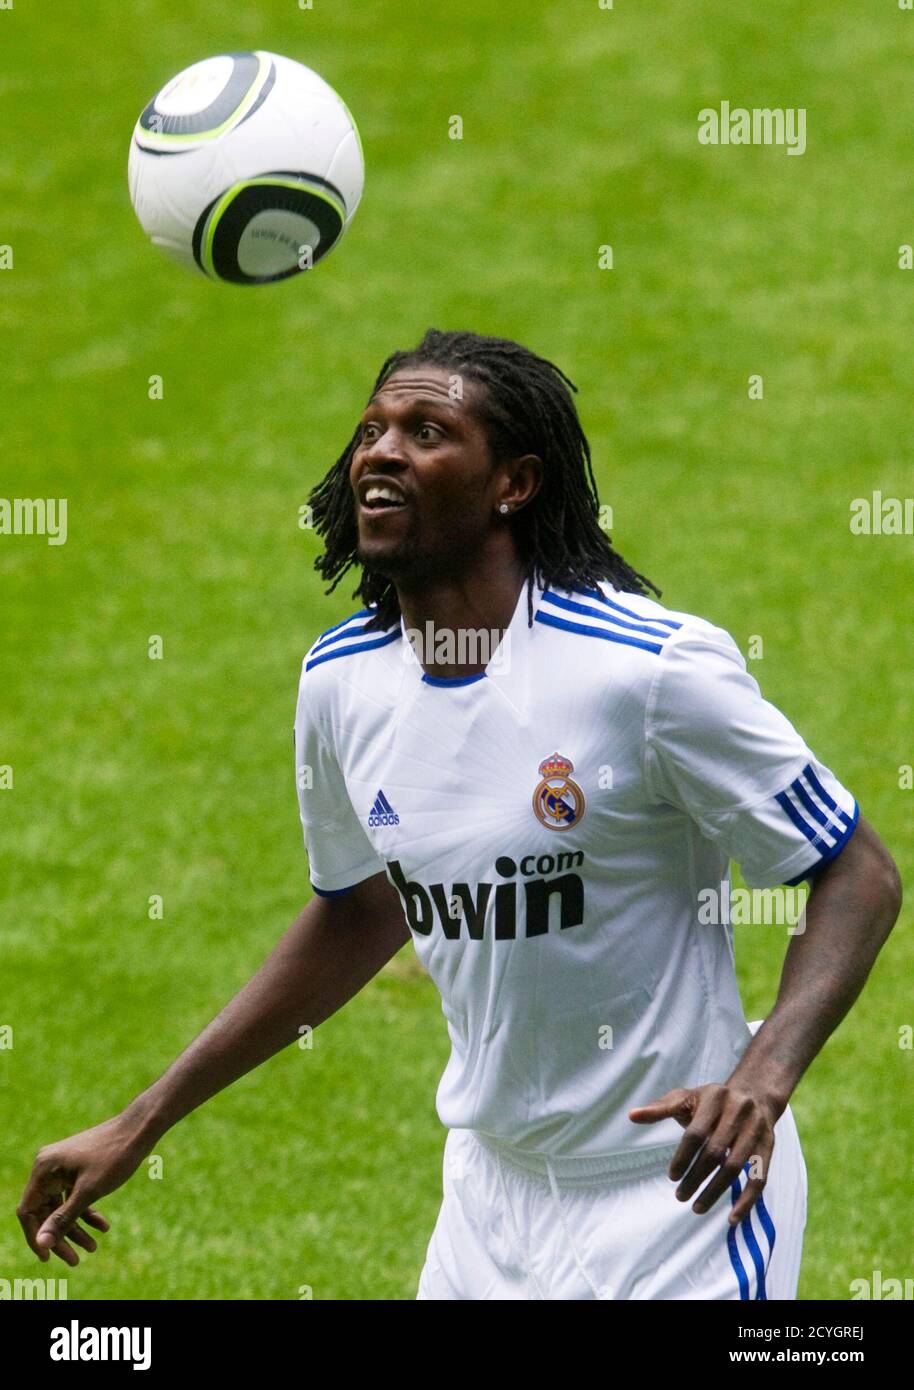 Real Madrid's new player Emmanuel Adebayor heads the ball during his  presentation at the Santiago Bernabeu stadium in Madrid January 27, 2011.  Real signed Adebayor from Manchester City on loan until the